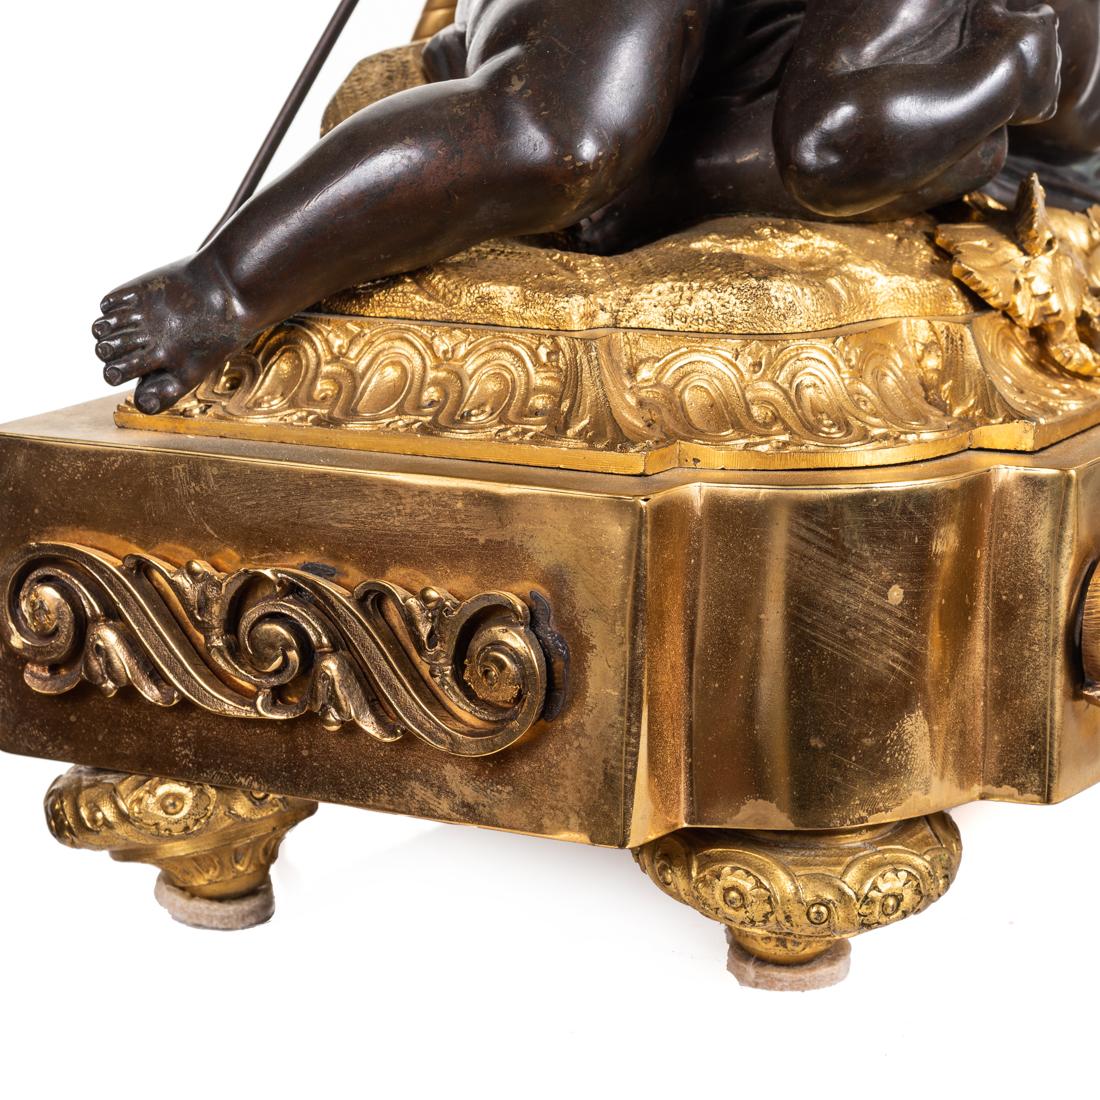 A Louis XVI gilt and patinated bronze lamp
after the model by Louis-Simon Boizot,
Late 19th century
Surmounted by two cherubs, drilled for electricity
Measures: Height 27 in. (68.58 cm.)
Width 10 in. (25.4 cm.),
Depth 6.5 in. (16.51 cm.).
 